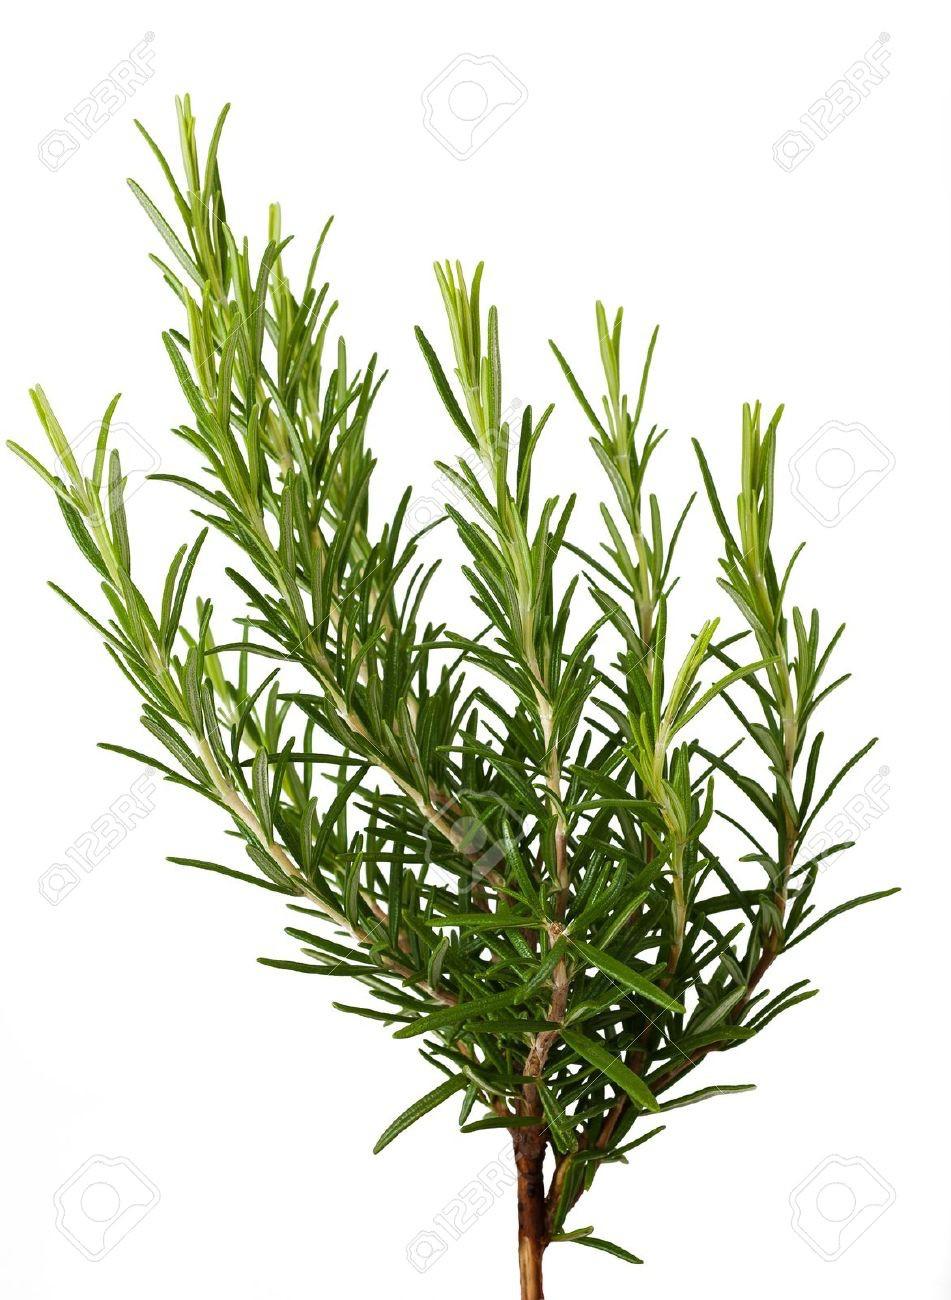 Rosemary (Rosemarinus officinalis) Rosemary likes a sunny spot, protected from winds, in well-drained soil. Can be propagated from cuttings or by layering.